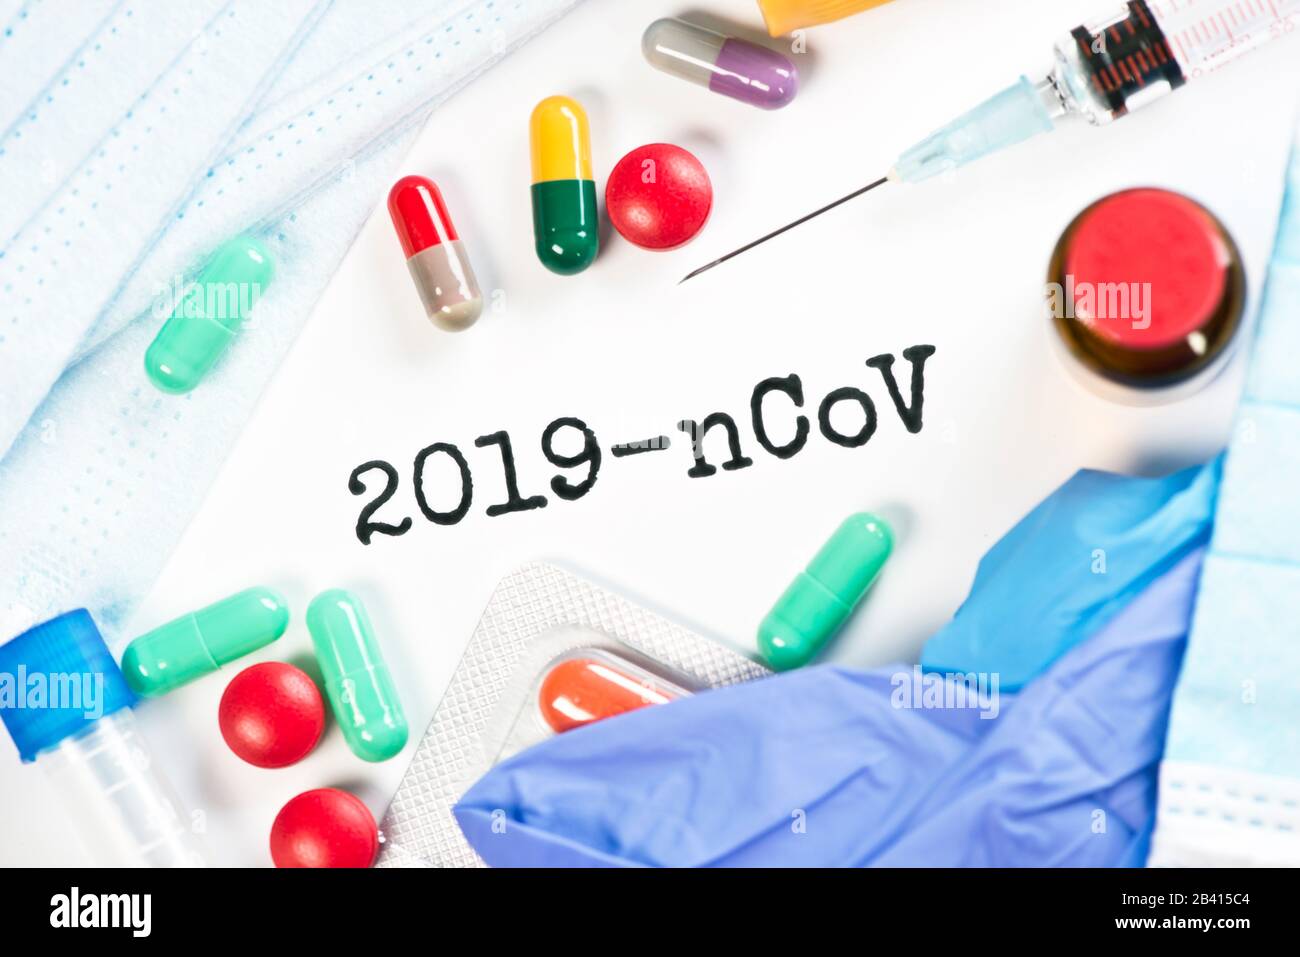 Corona virus 2019-nCoV text concept with gloves, masks, syringe vial and various medications.. Stock Photo